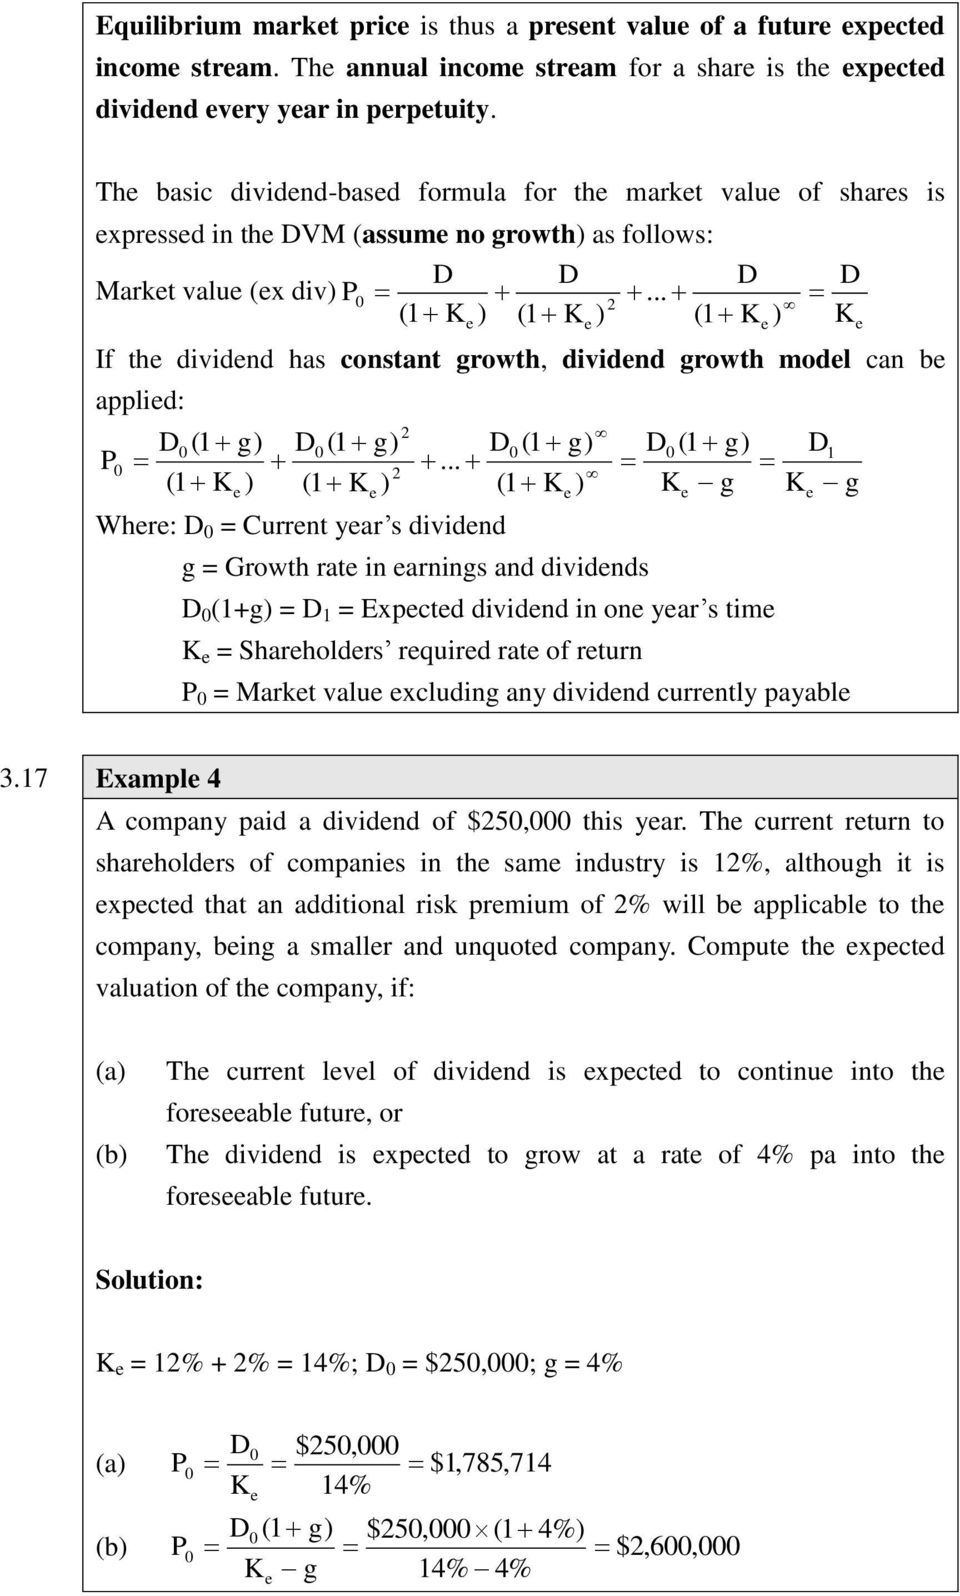 .. (1 K ) If the dividend has constant growth, dividend growth model can be applied: P 0 D0 (1 g) D0 (1 g) 2 (1 K ) (1 K ) e Where: D 0 = Current year s dividend e 2 D0 (1 g).